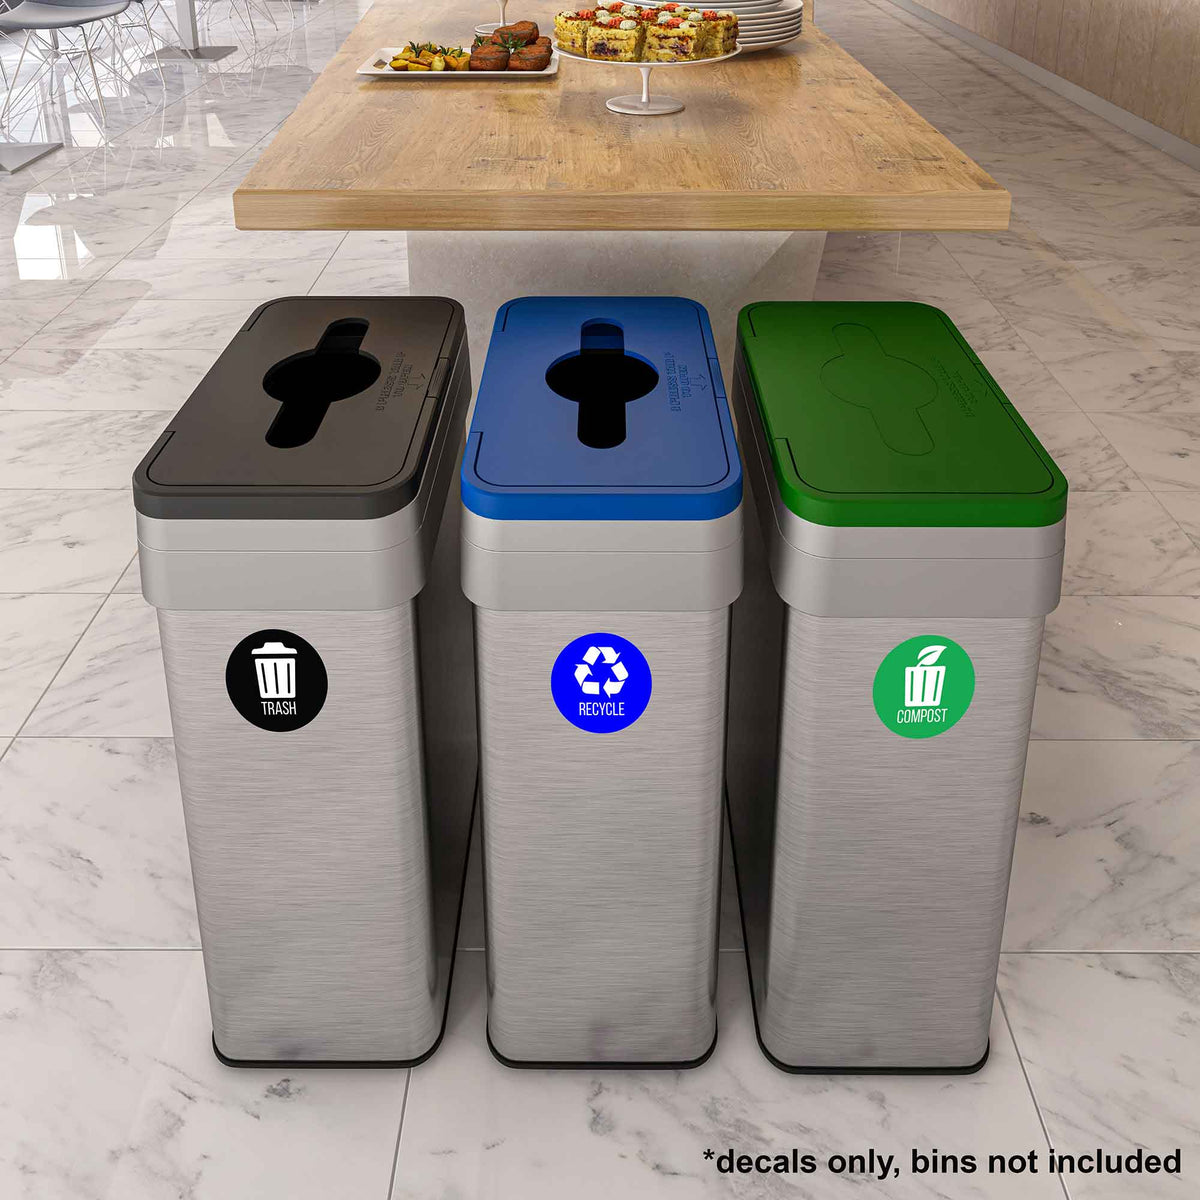 iTouchless Trash, Recycle, and Compost Vinyl Sticker Set. Decals only, bins not included.